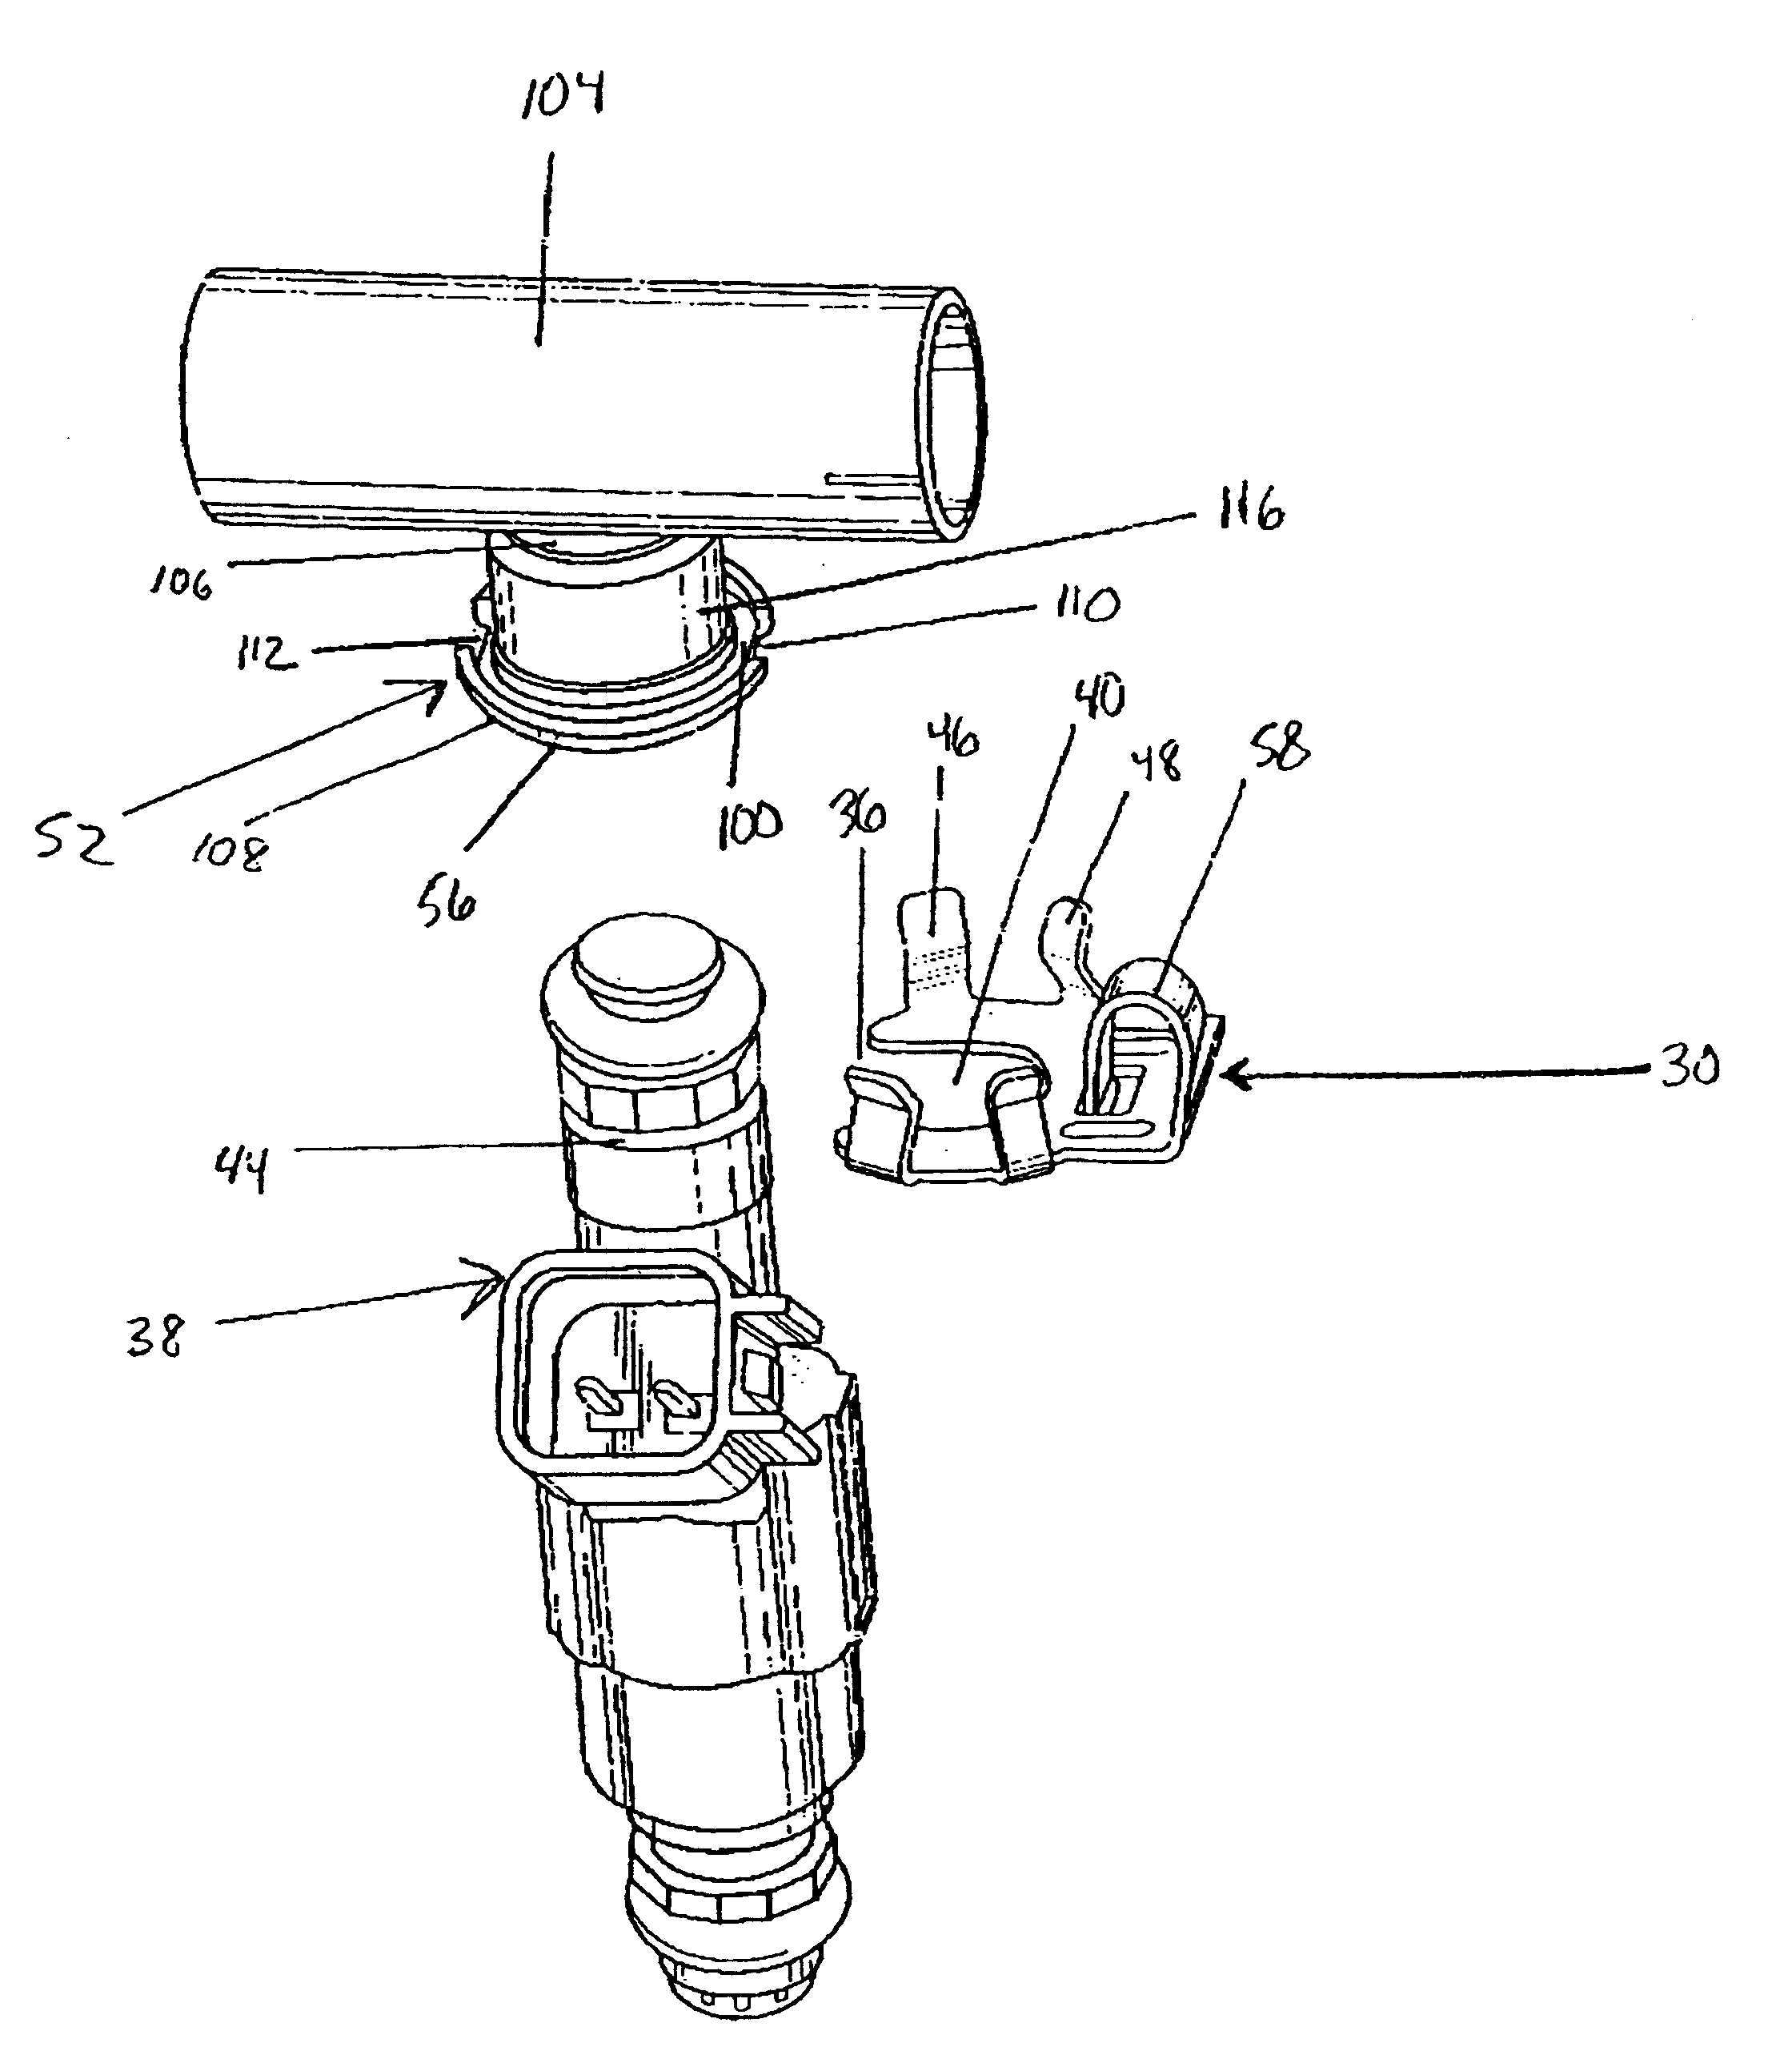 Method and apparatus for maintaining the alignment of a fuel injector